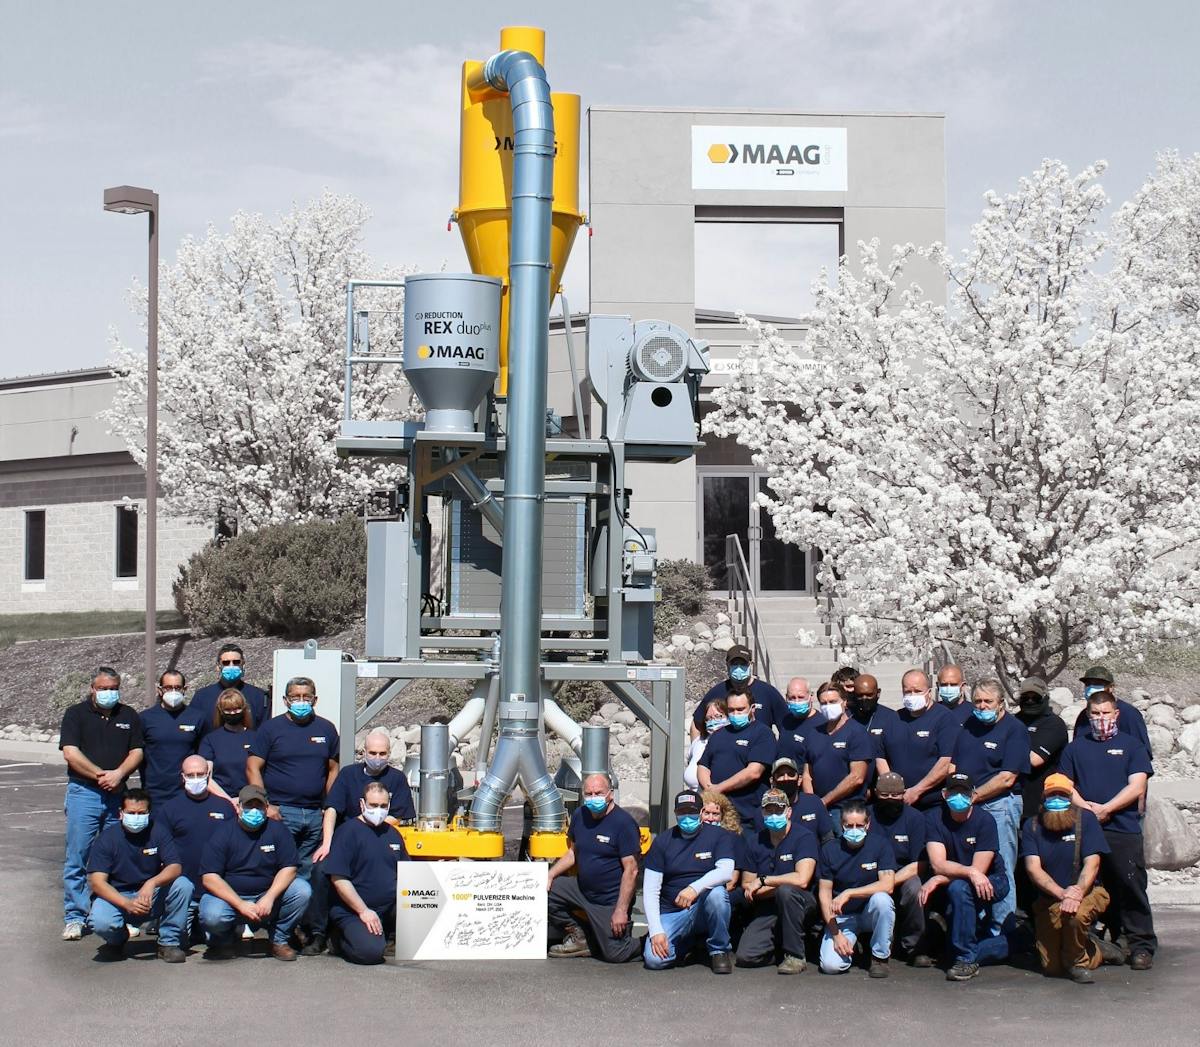 Maag Reduction employees stand near the 1,000th pulverizer produced at their facility in Kent, Ohio.